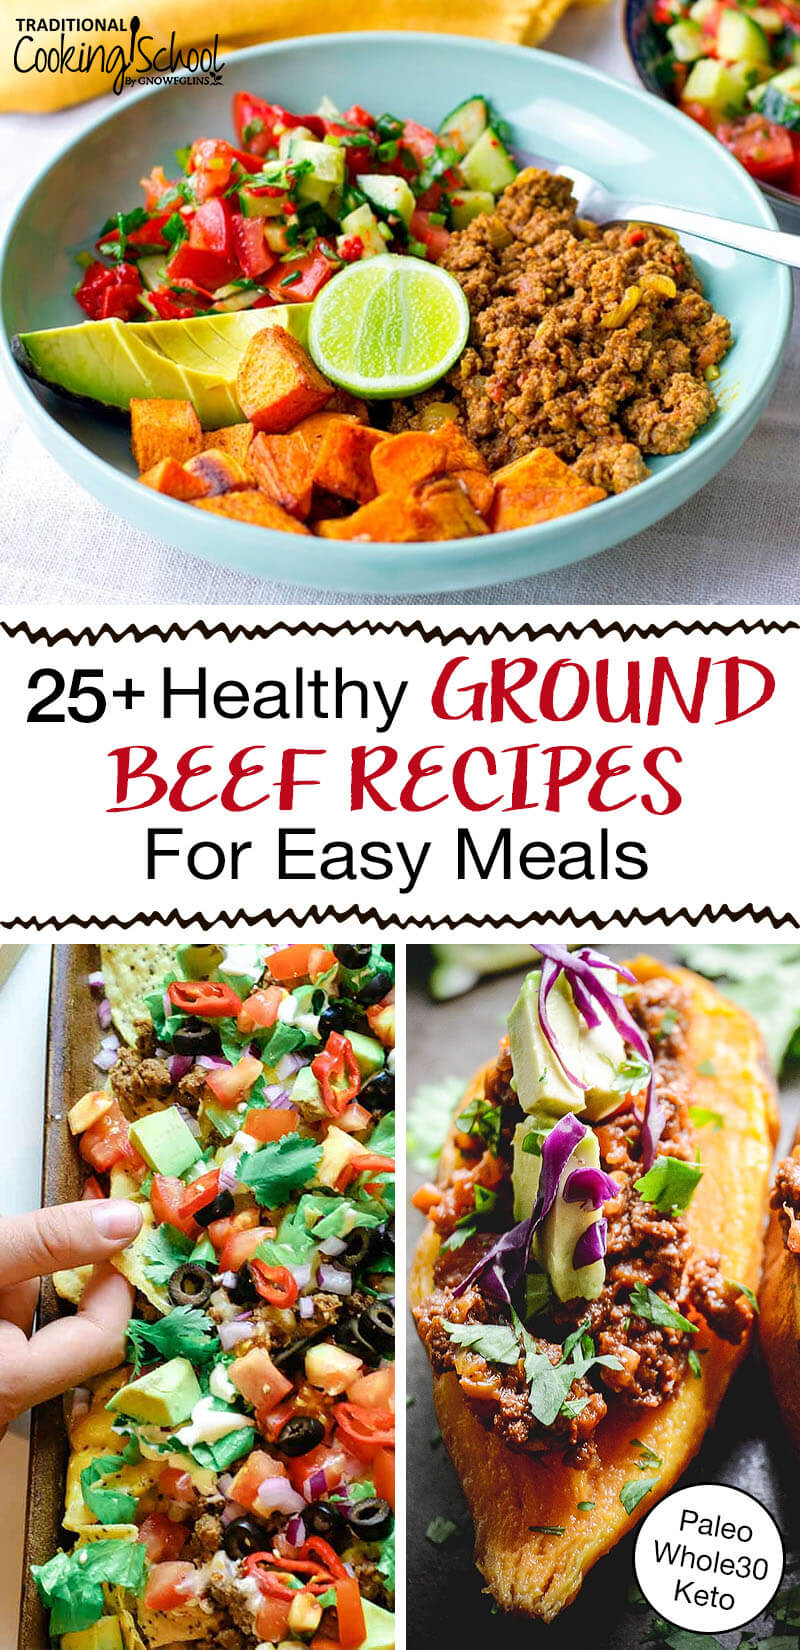 photo collage of delicious main dishes including nachos with text overlay: "25+ Healthy Ground Beef Recipes For Easy Meals (Paleo Whole30 Keto)"